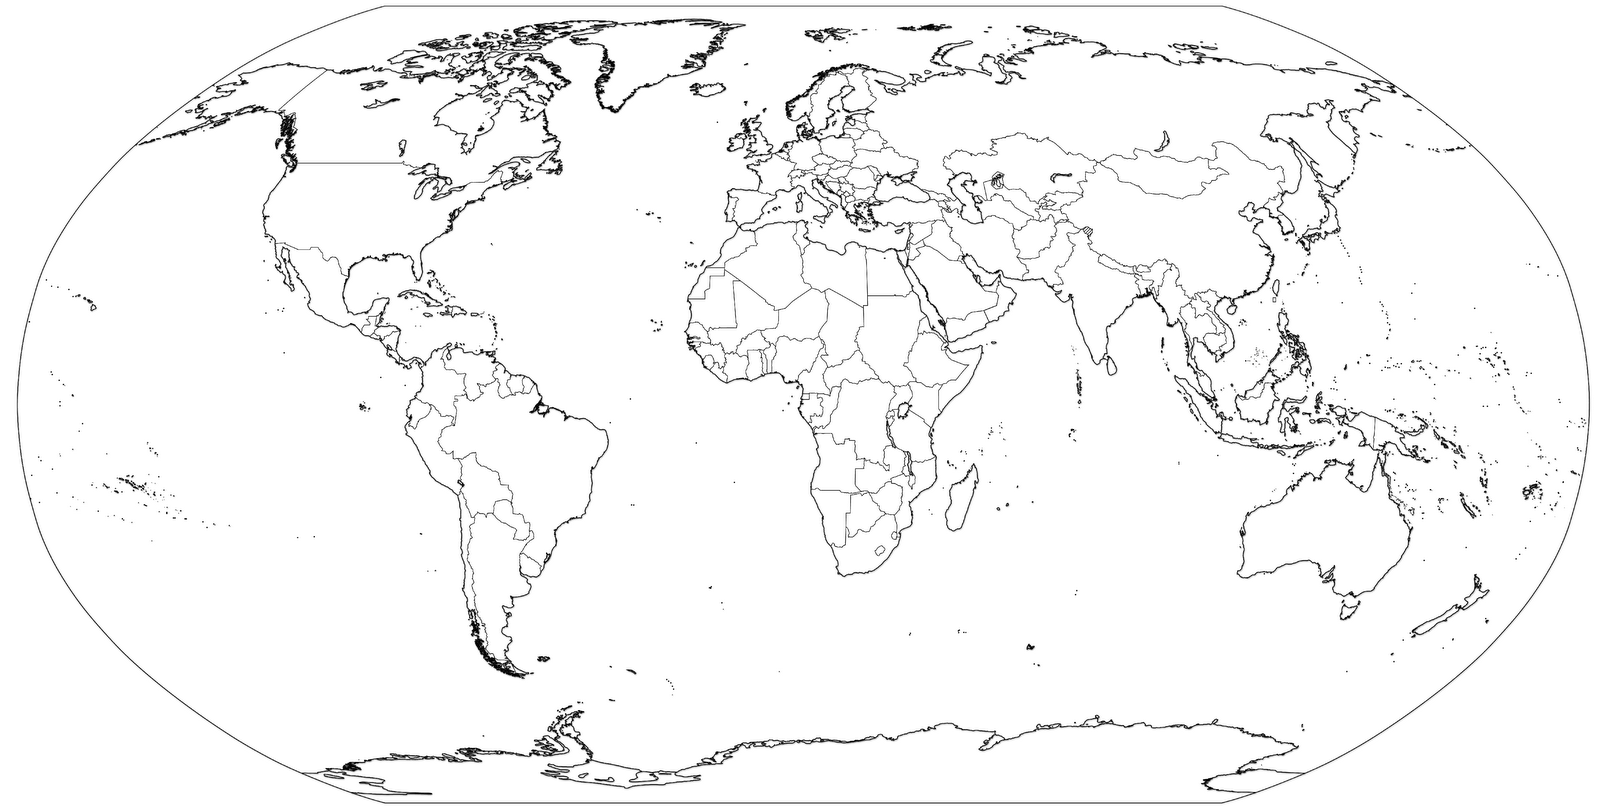 Free World Map Coloring Page For Kids Download Free World Map